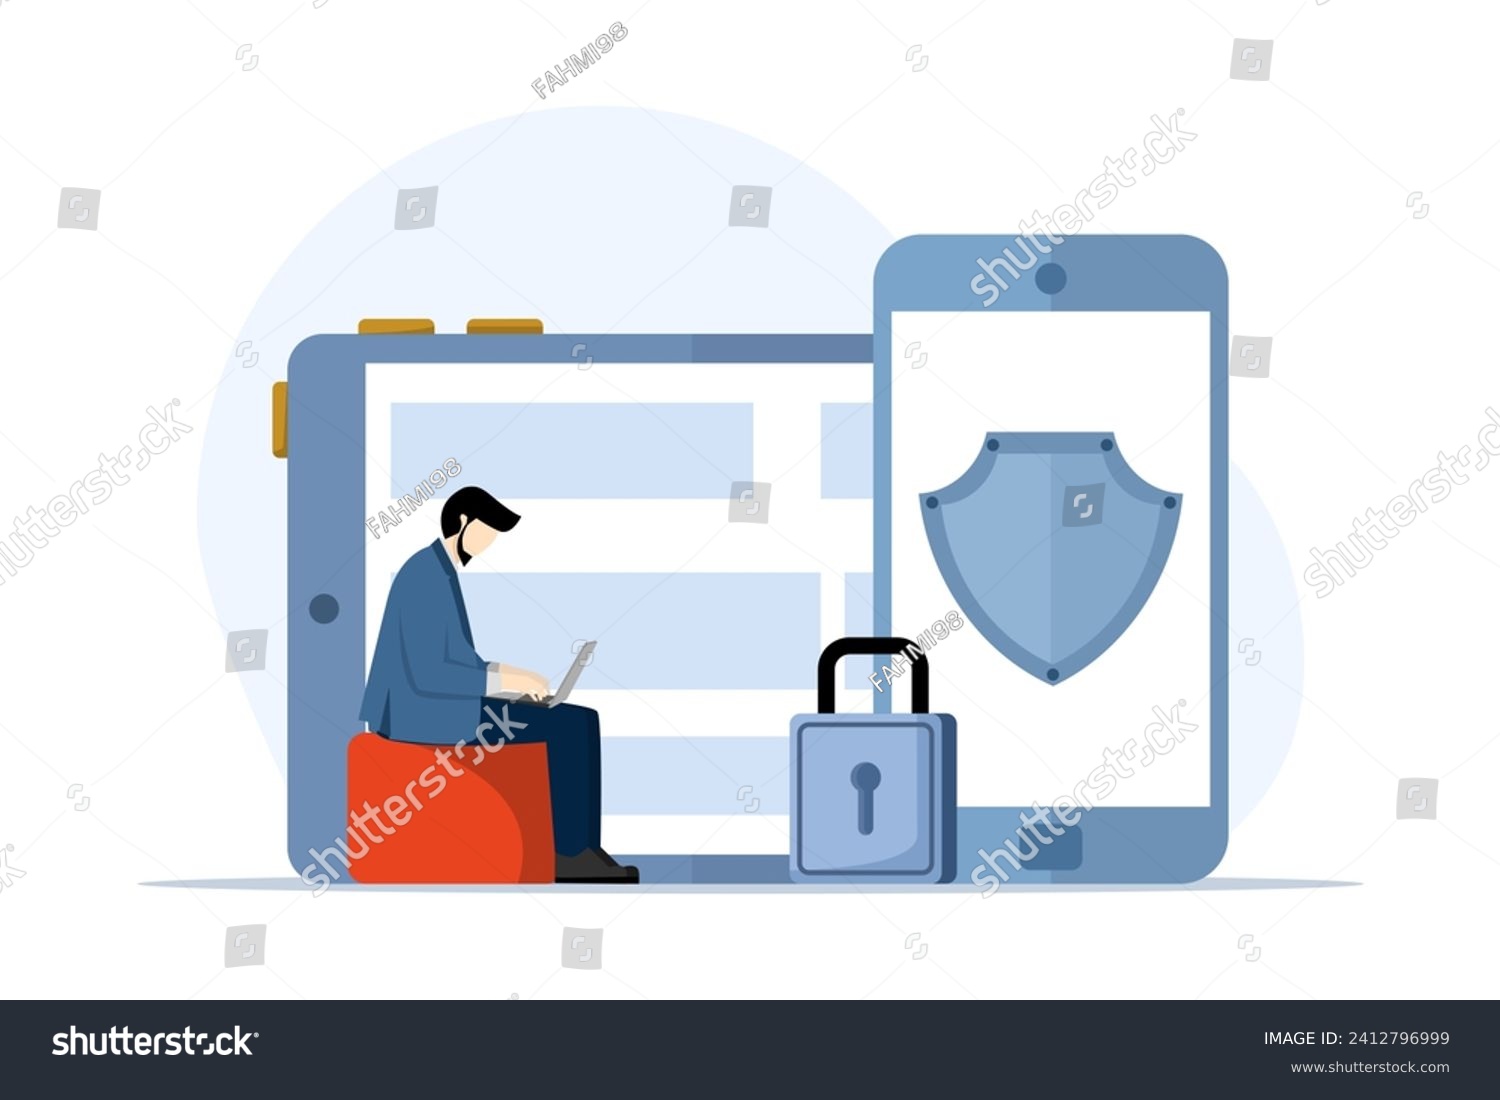 SVG of concept General data protection regulation, Control and security of personal information, browser cookie consent, GDPR disclosure data collection. Flat vector modern illustration on white background. svg